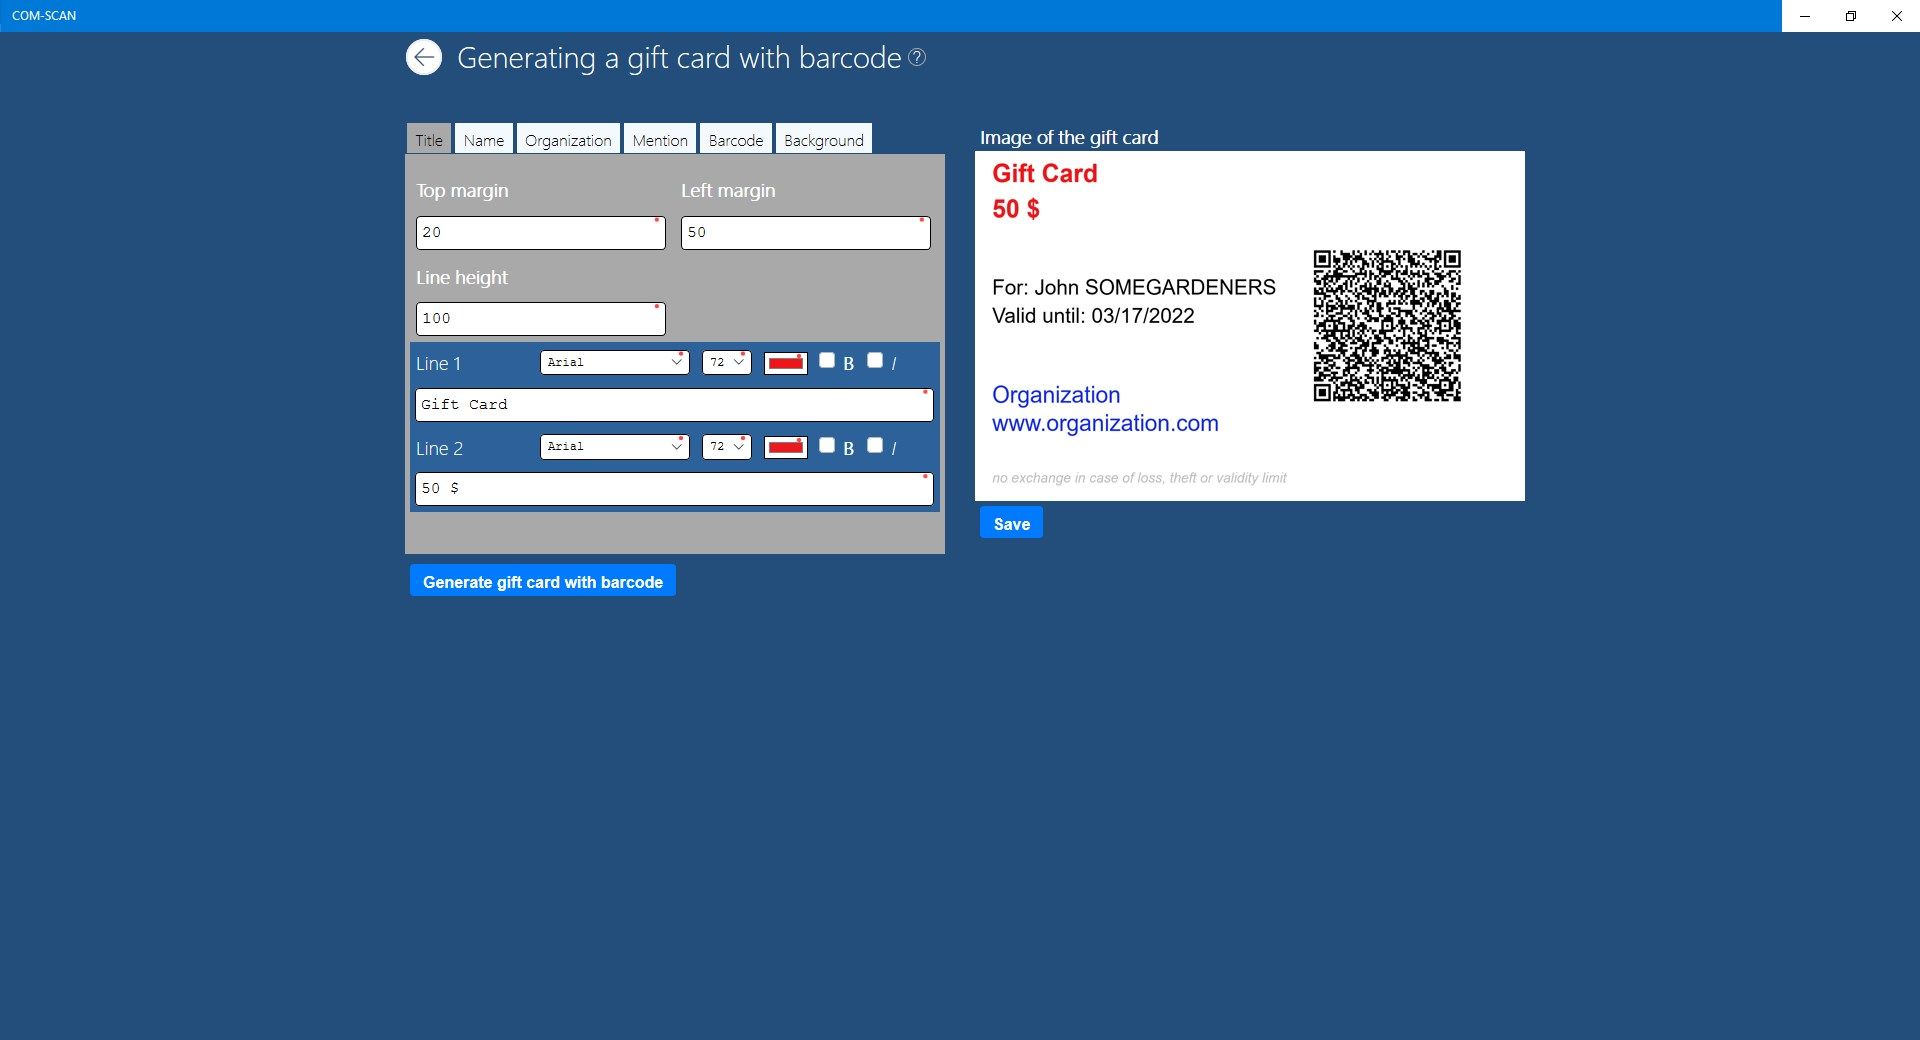 Generate gift cards with barcode